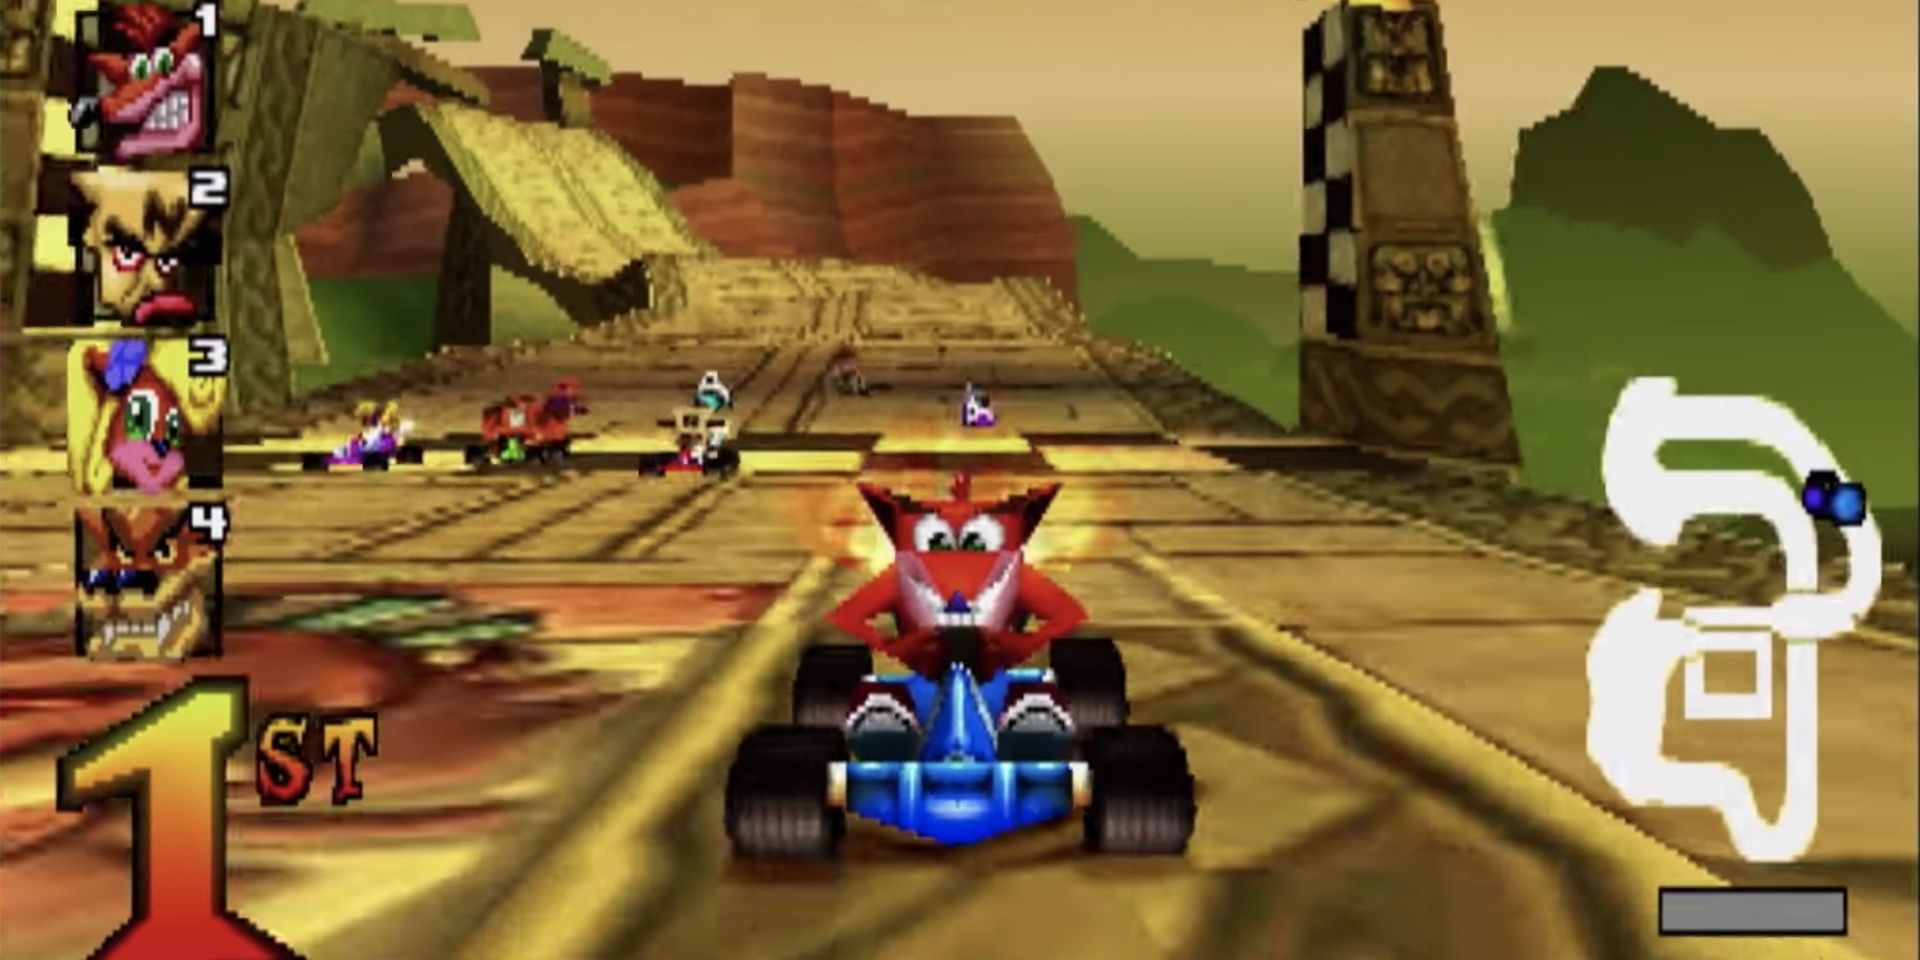 Crash gets ready to race in PlayStation's Crash Team Racing